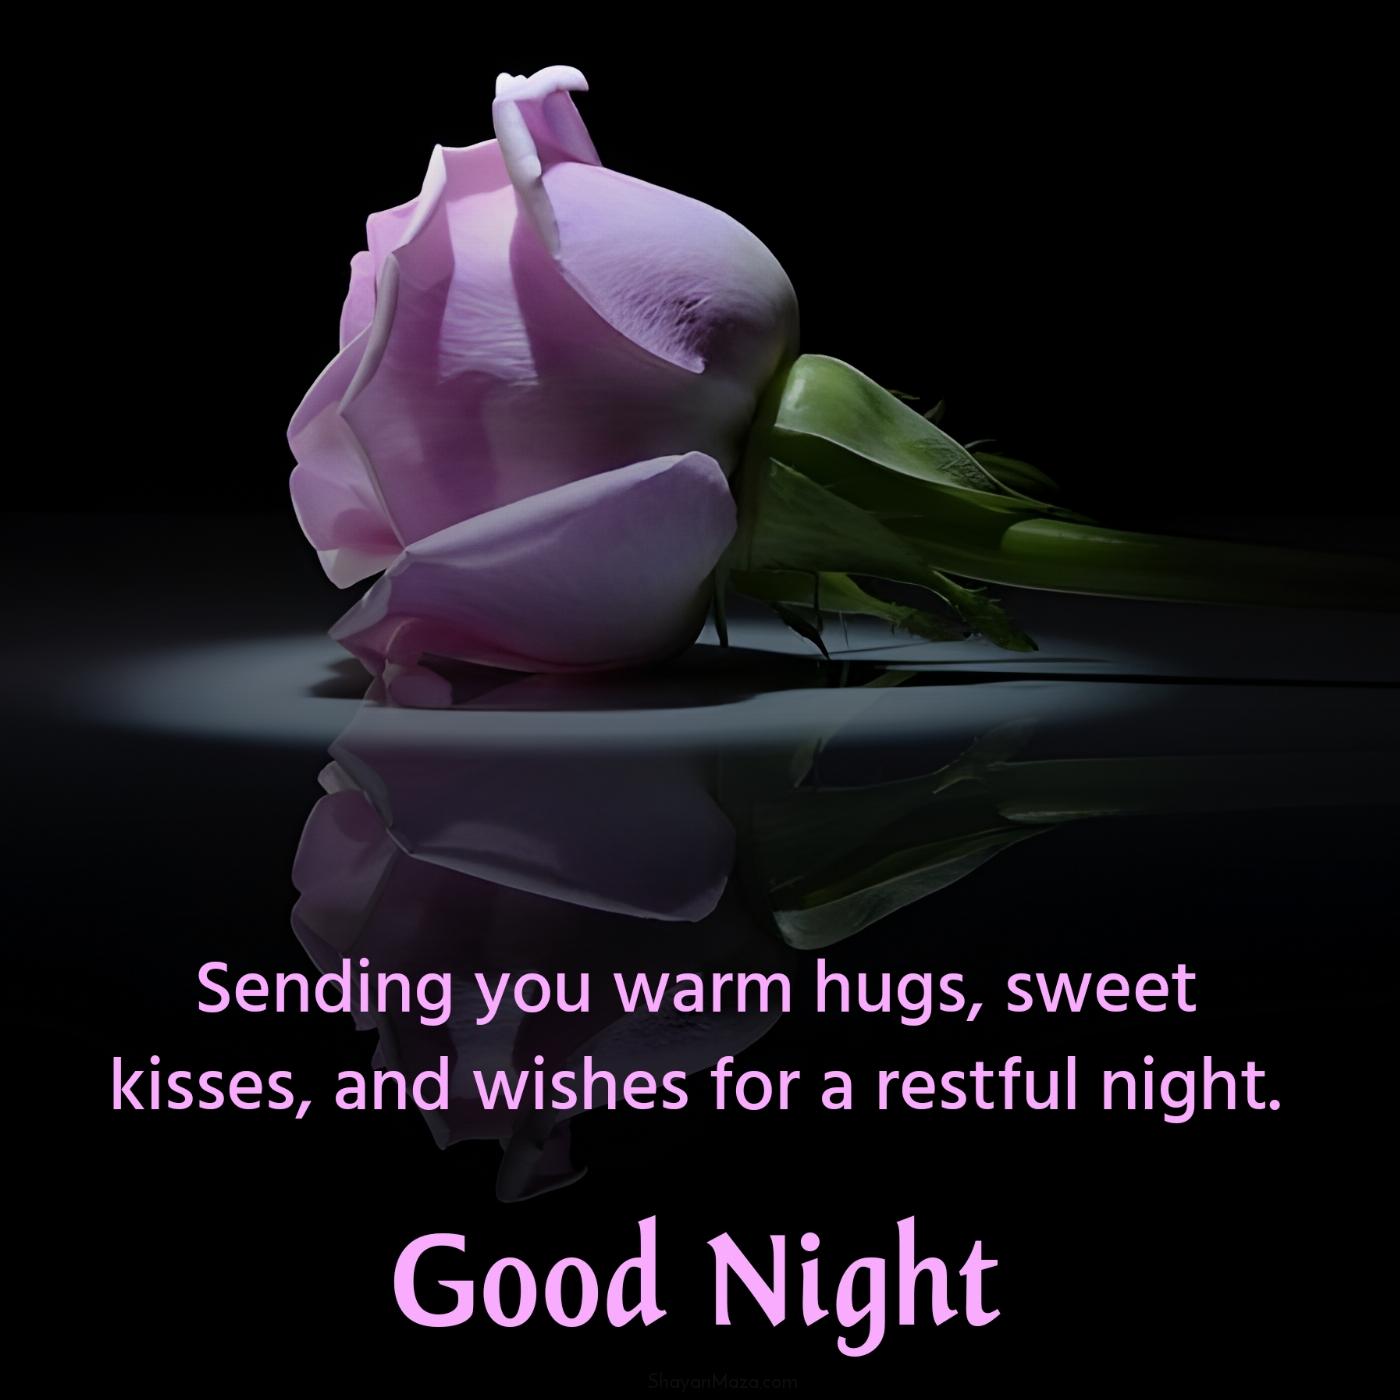 Sending you warm hugs sweet kisses and wishes